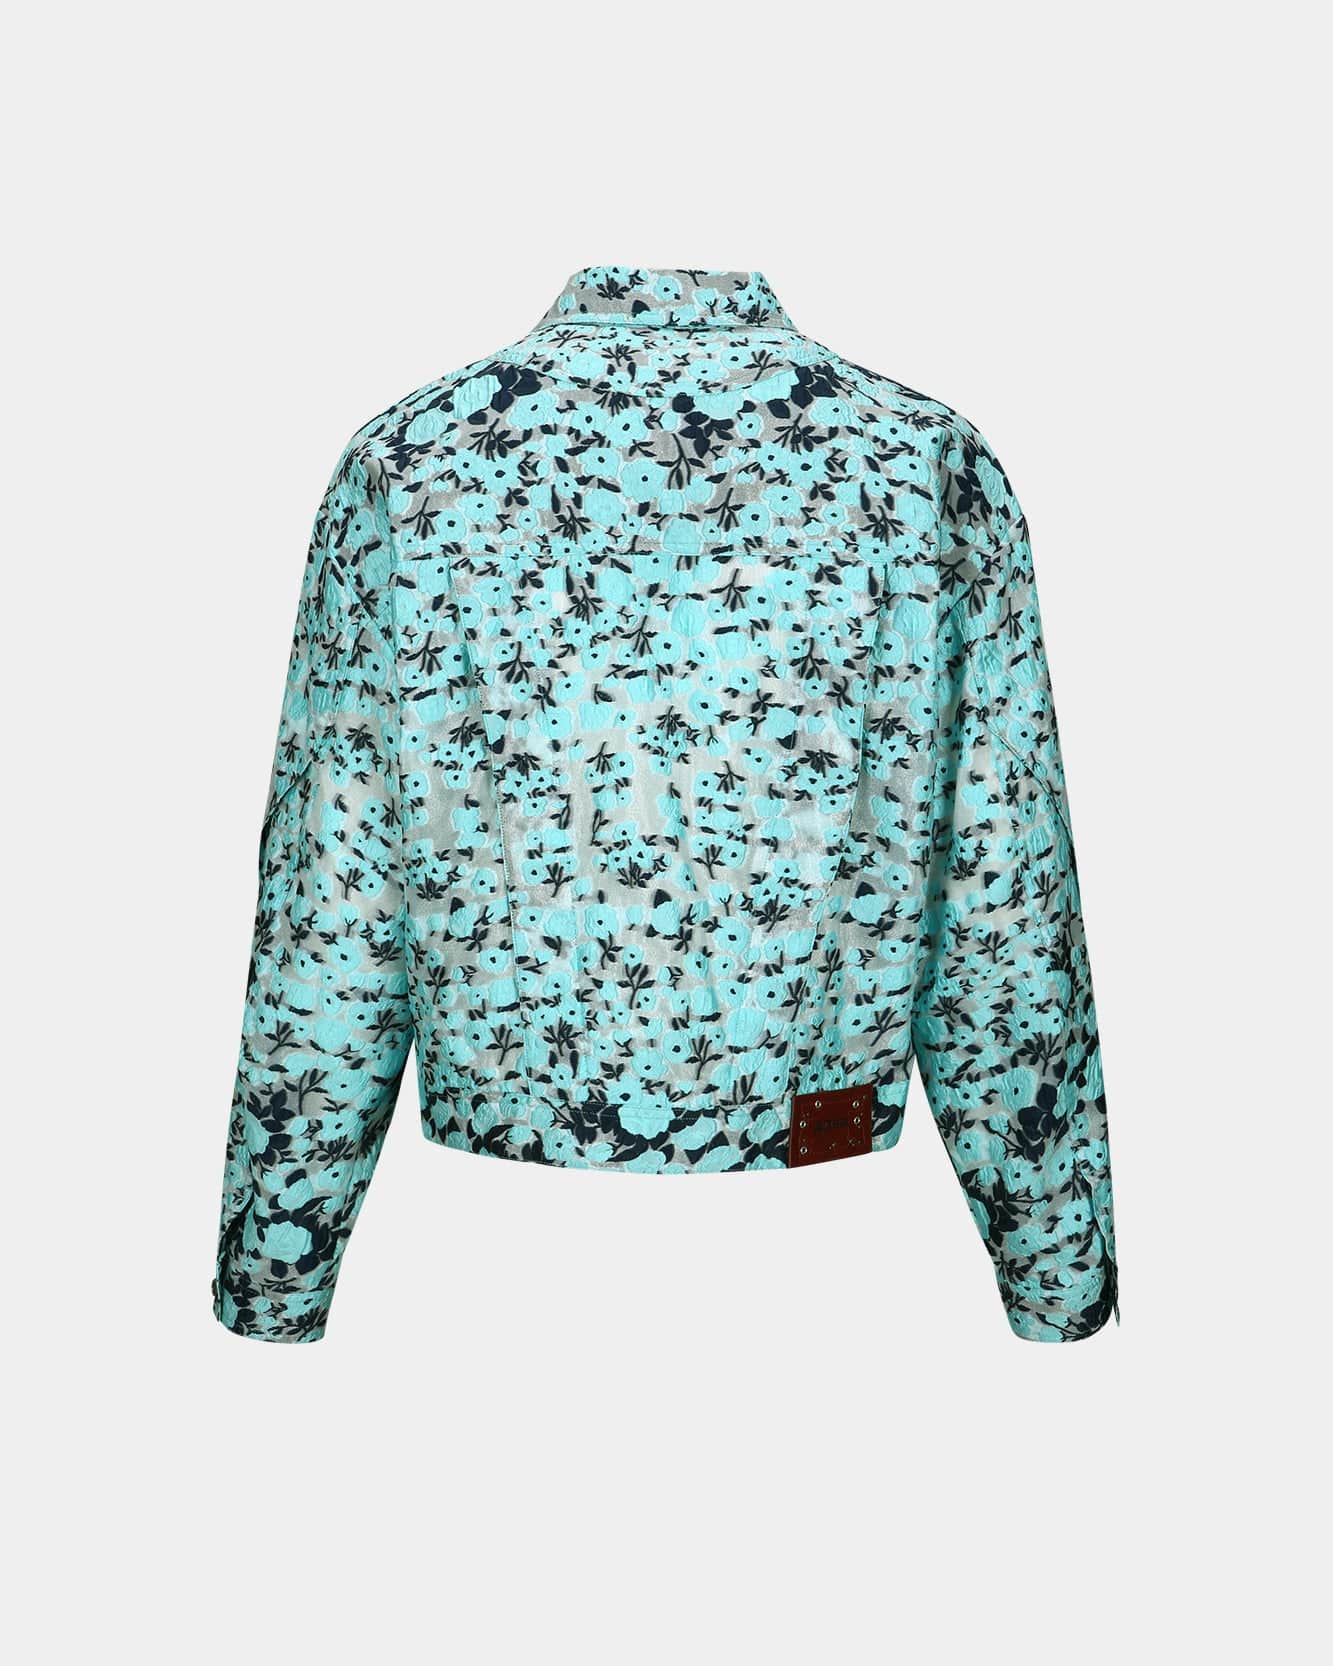 Andersson Bell FABRIAN FLOWER ZIP-UP JACKET awa587m(SKY BLUE)